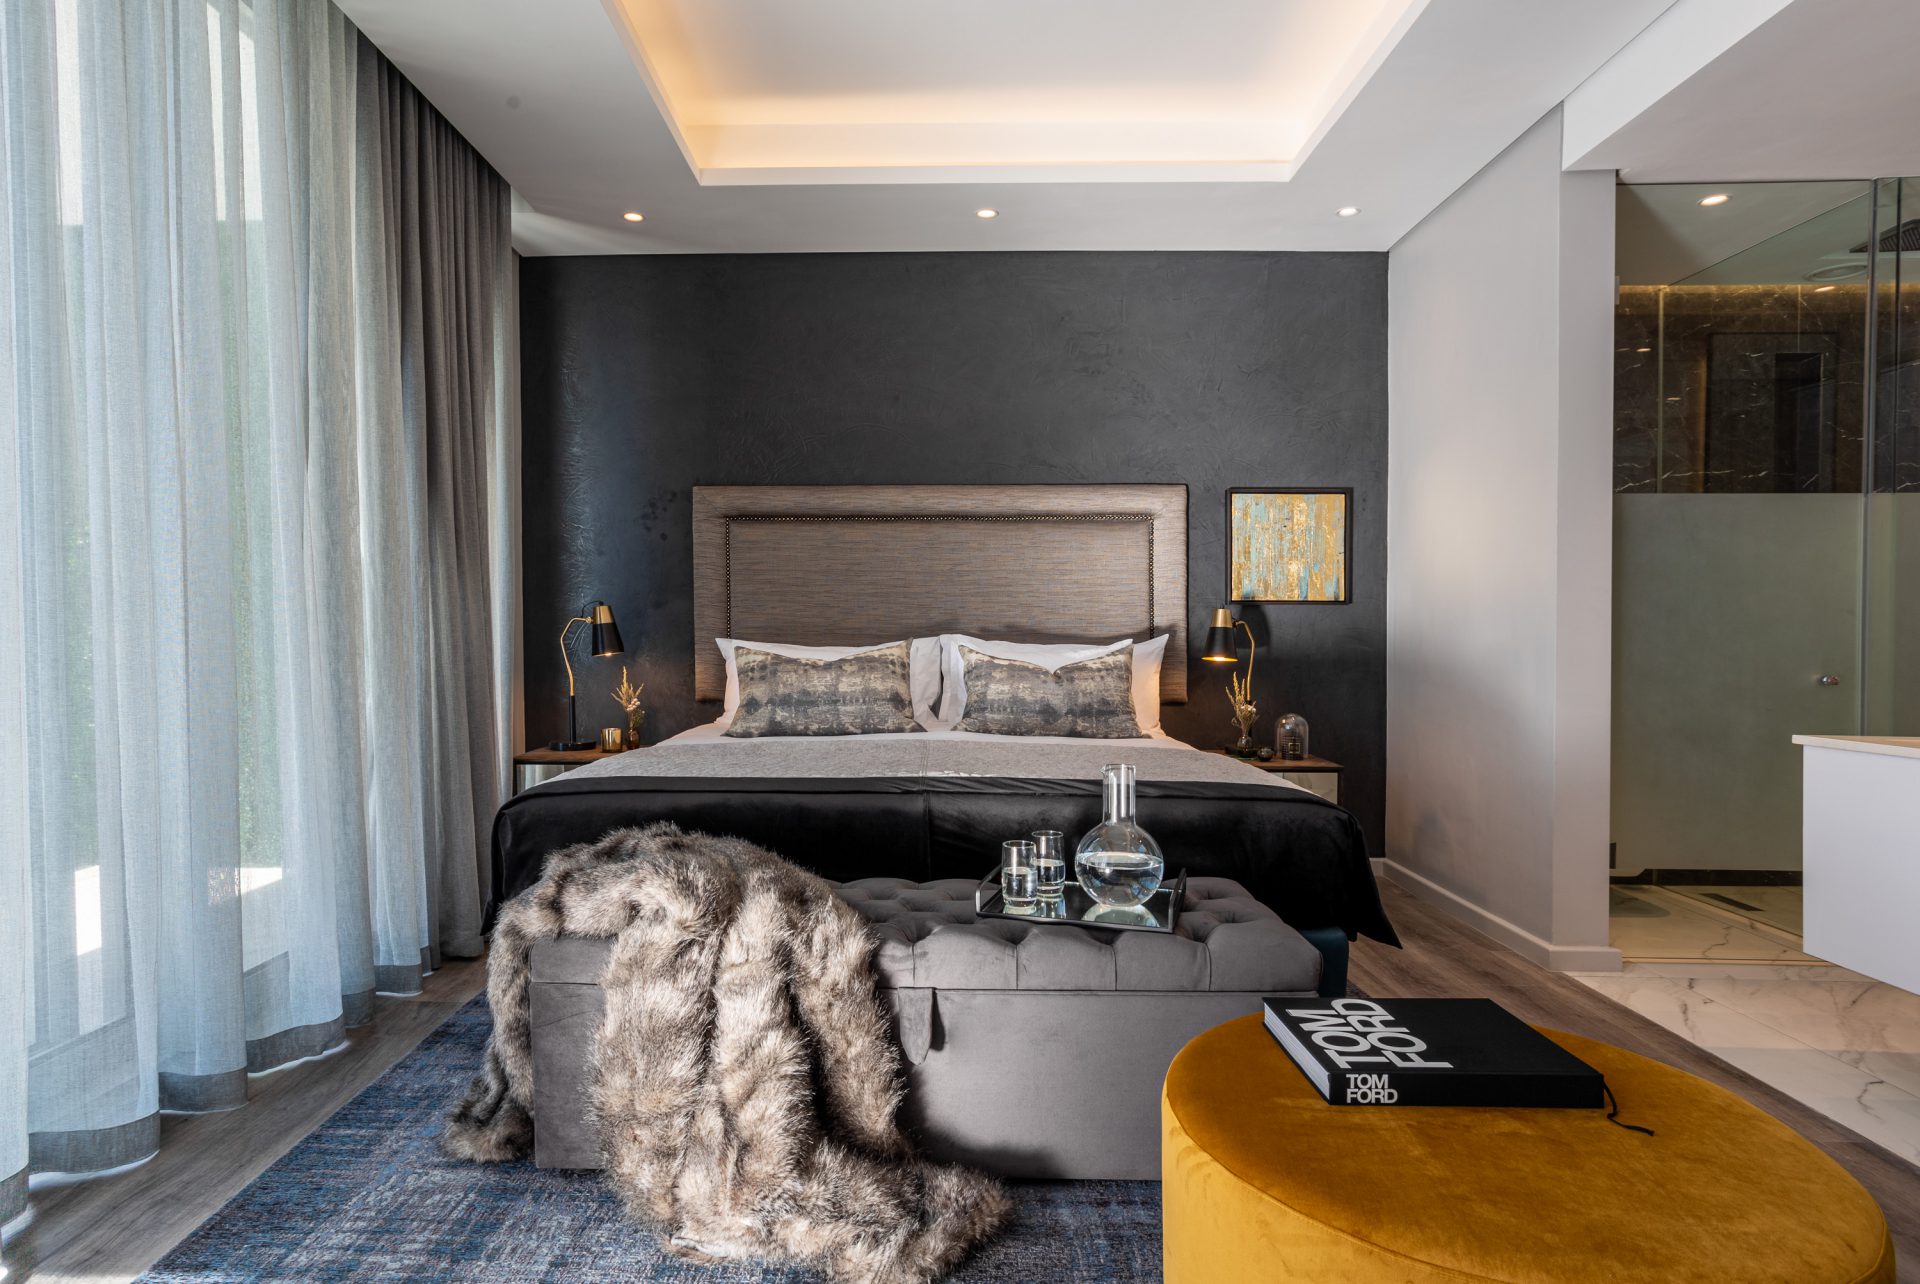 A bedroom setting with dark luxurious finishes